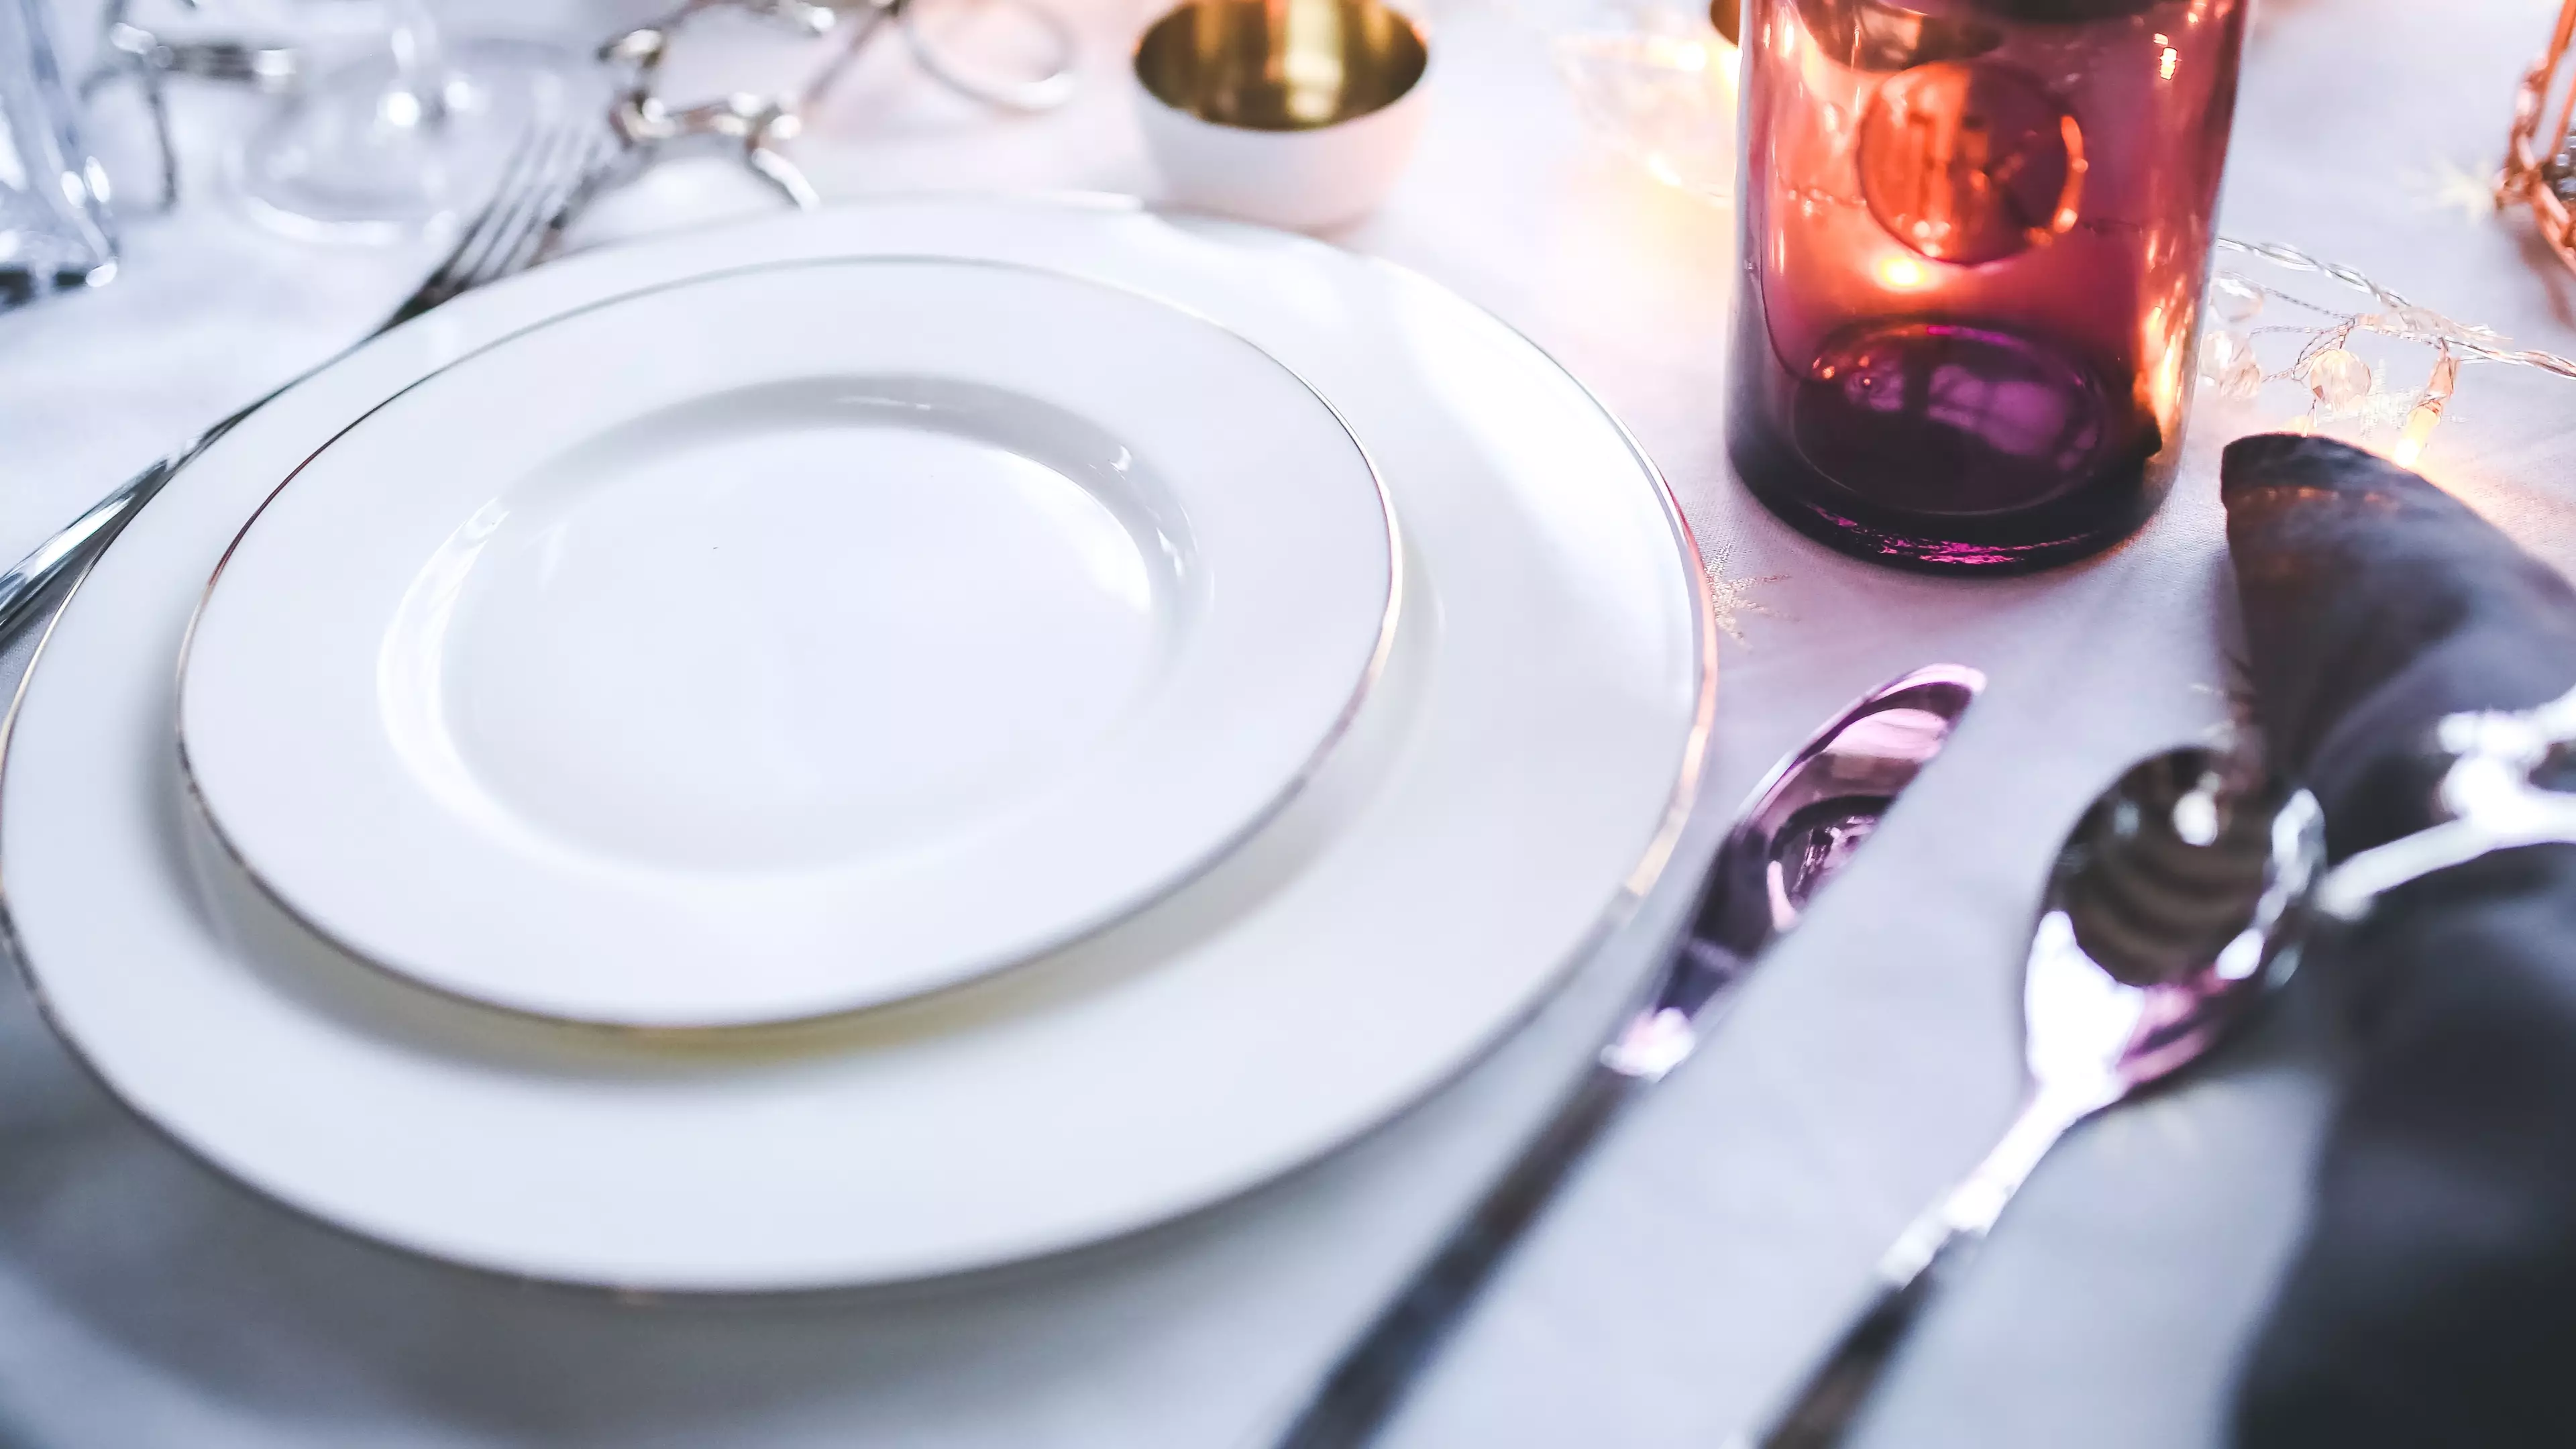 Mother-In-Law Wants To Charge £17 Per Person for Family Christmas Lunch